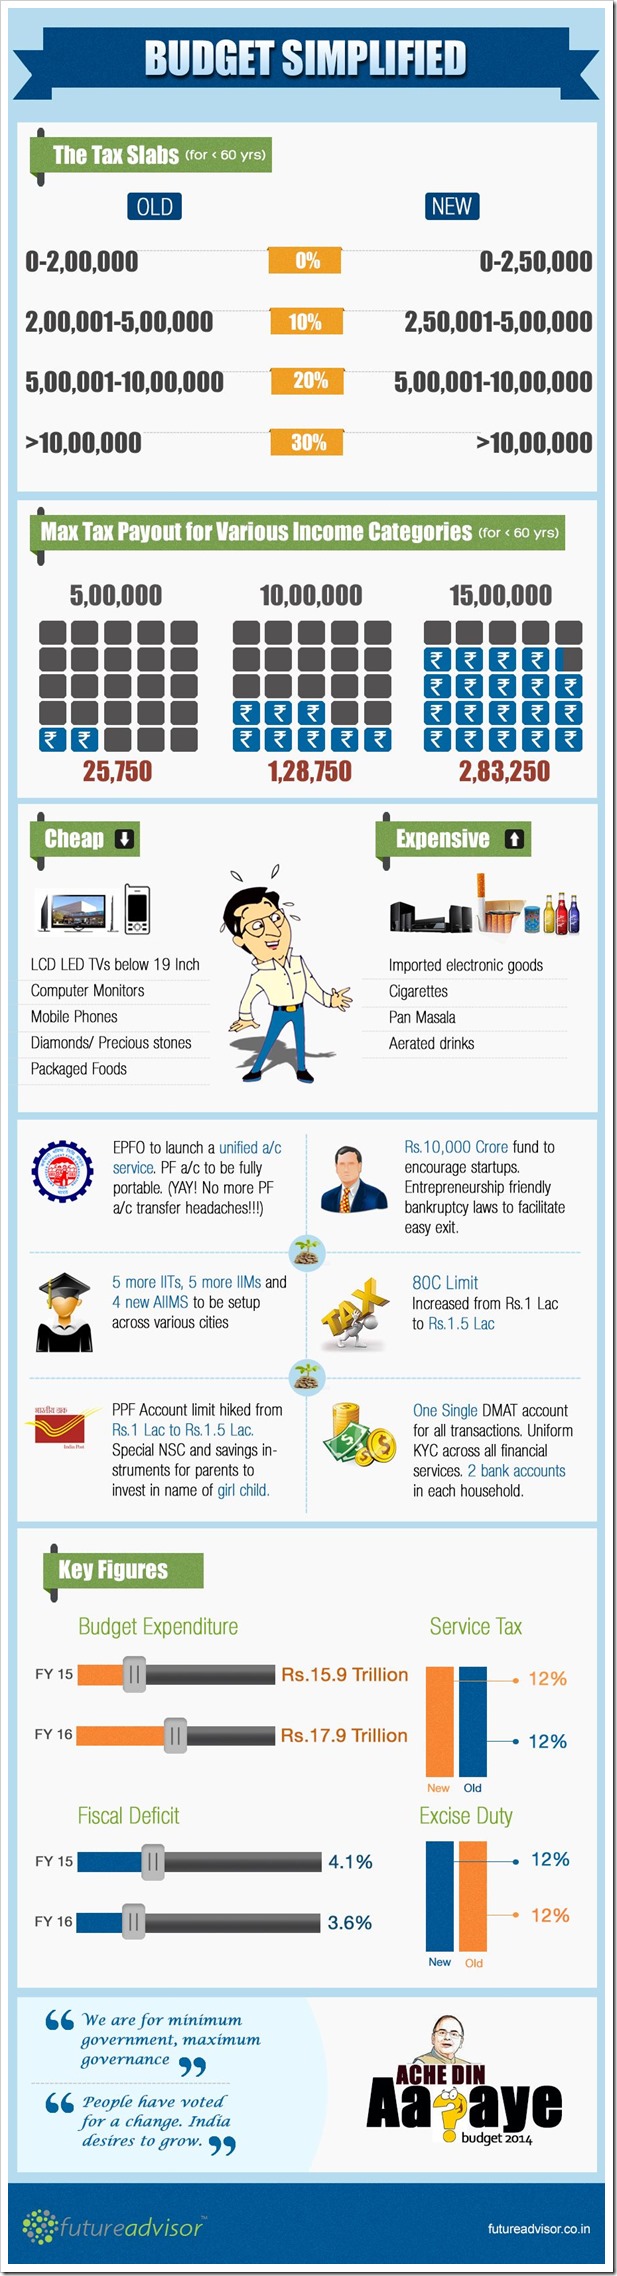 Budget2014-Simplified-Infographic